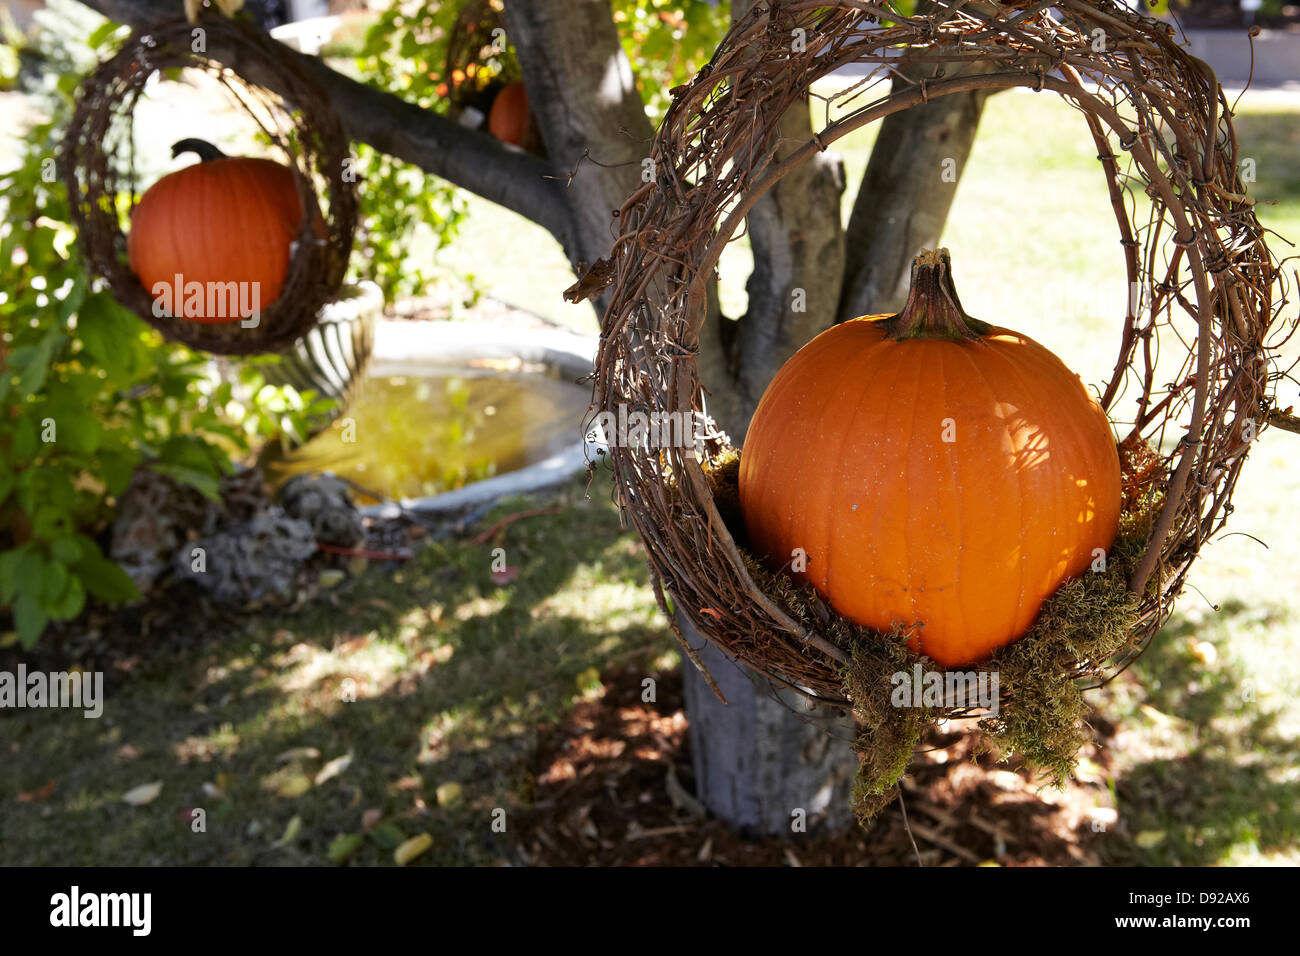 Pumpkin hanging from grapevine wreath in tree Stock Photo